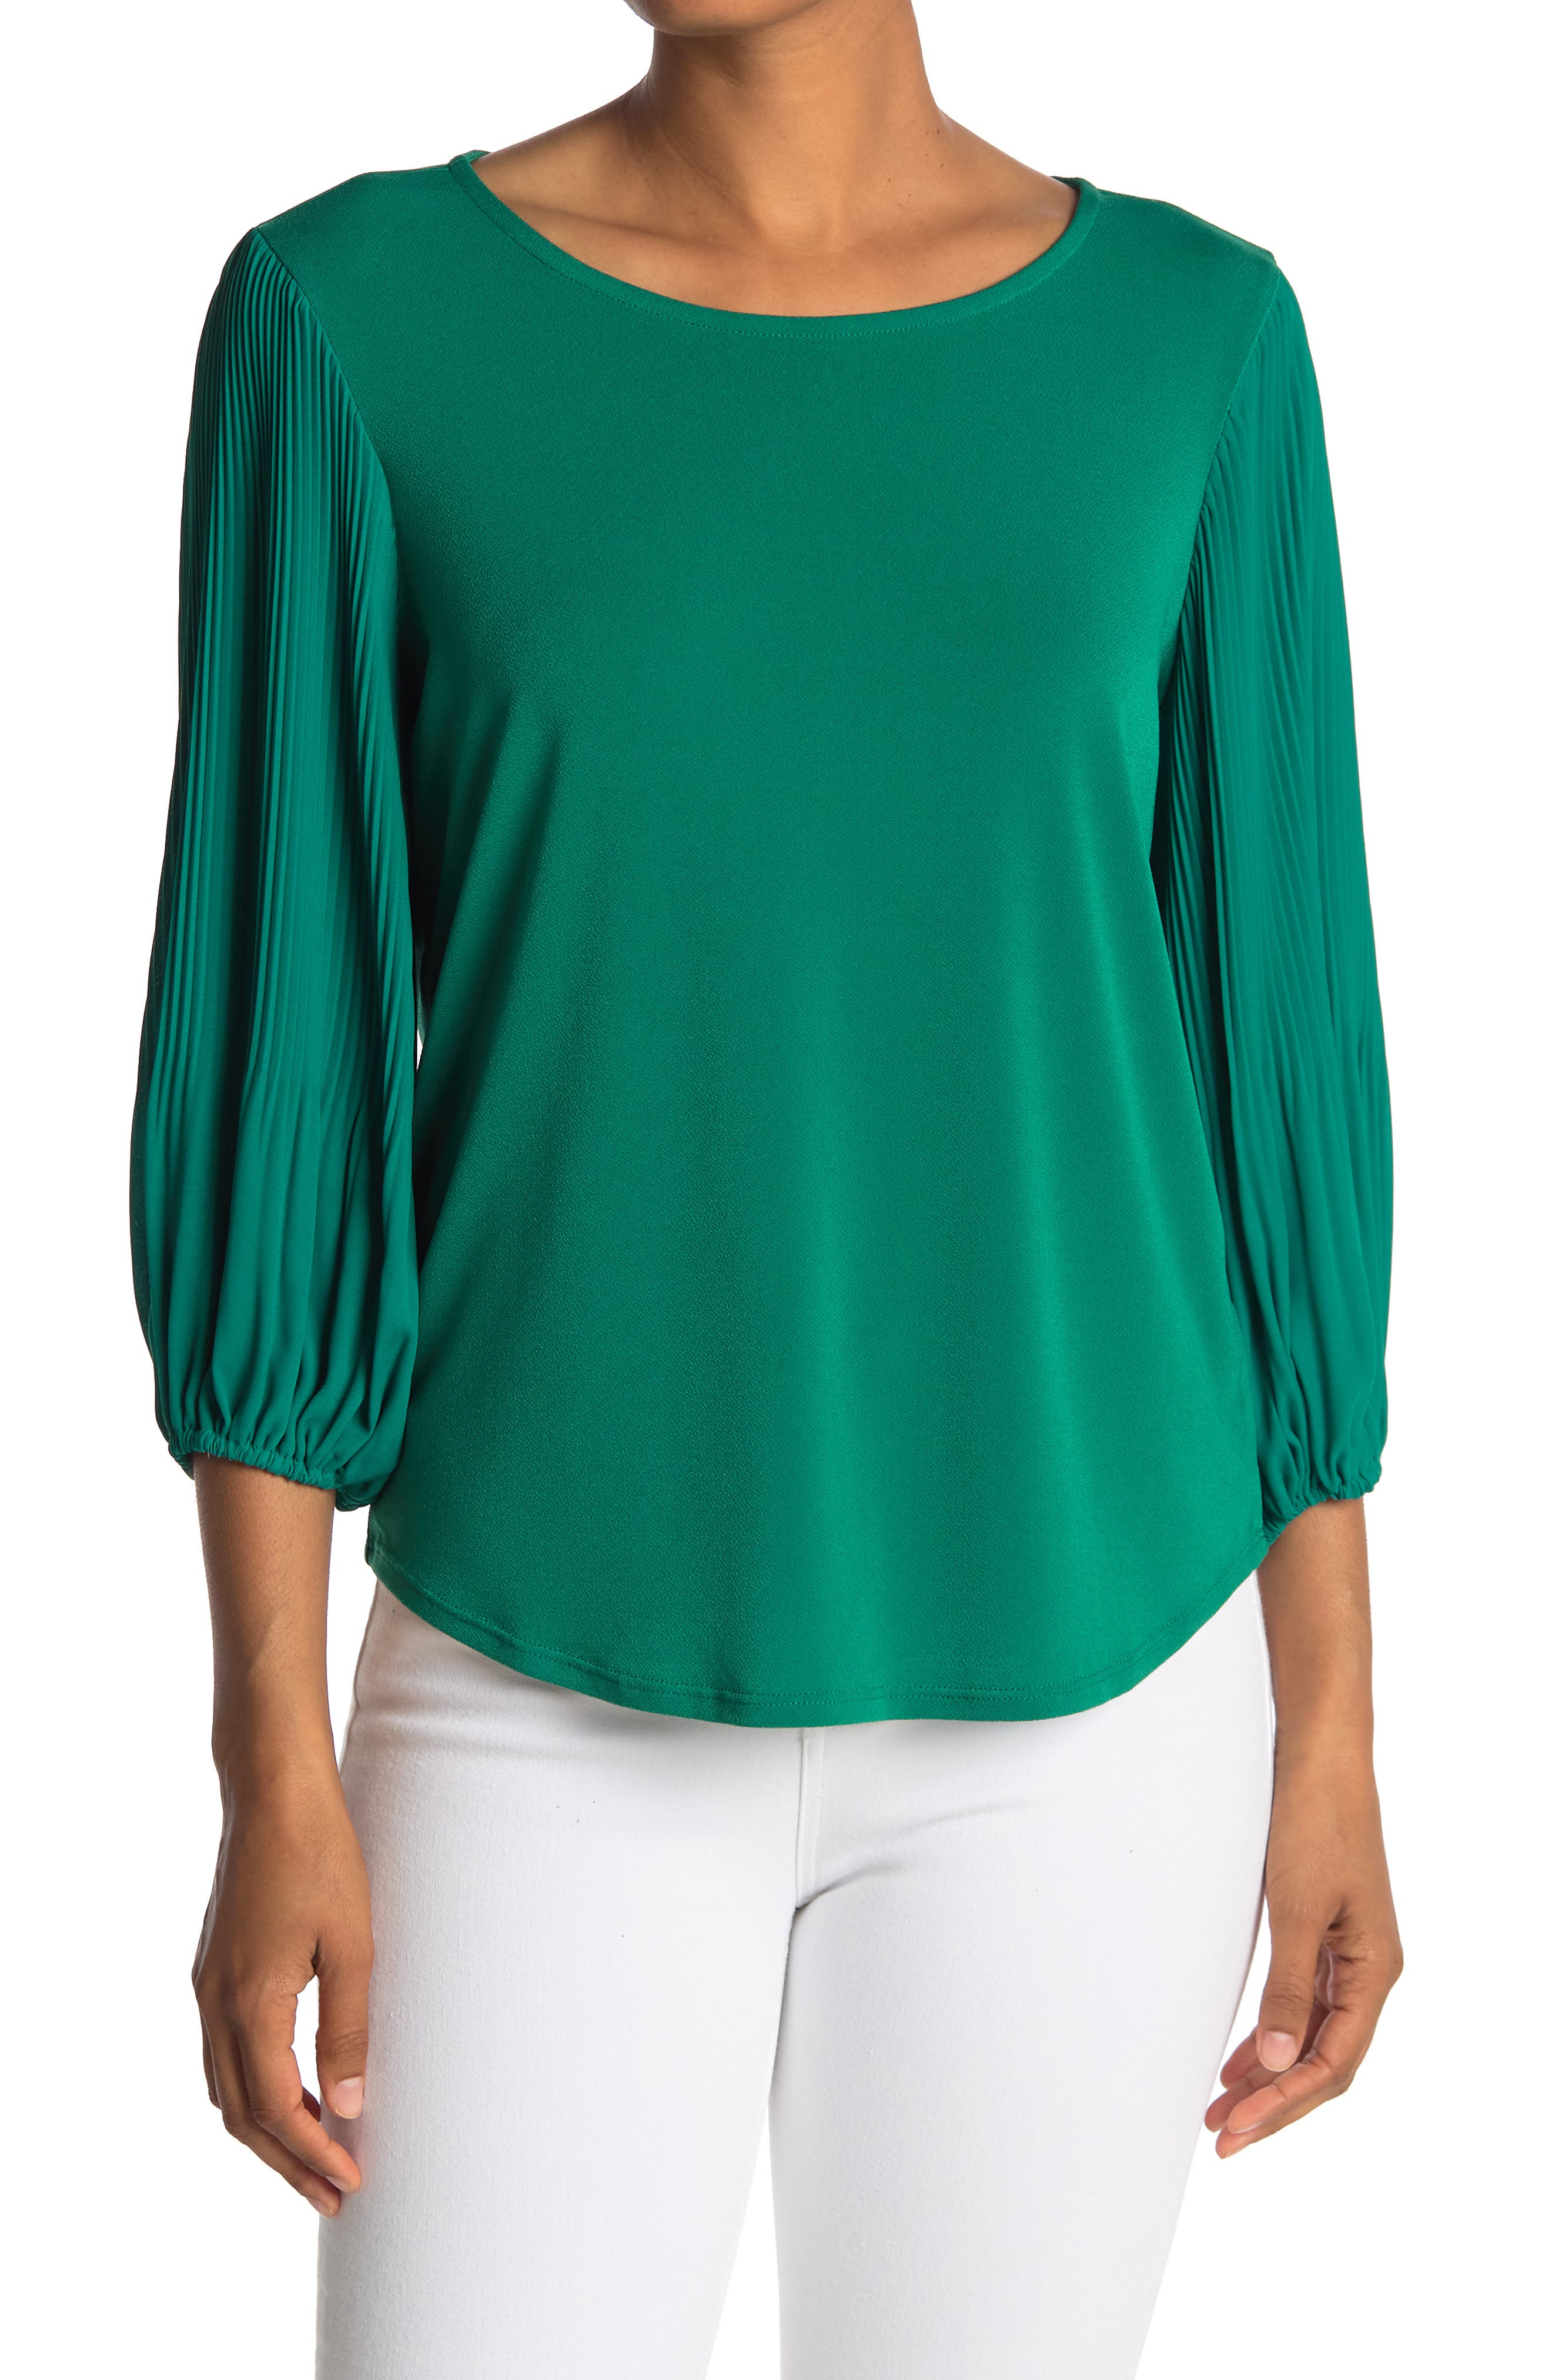 Adrianna Papell Solid Moss Crepe Pleat Woven Top In Lucemerald